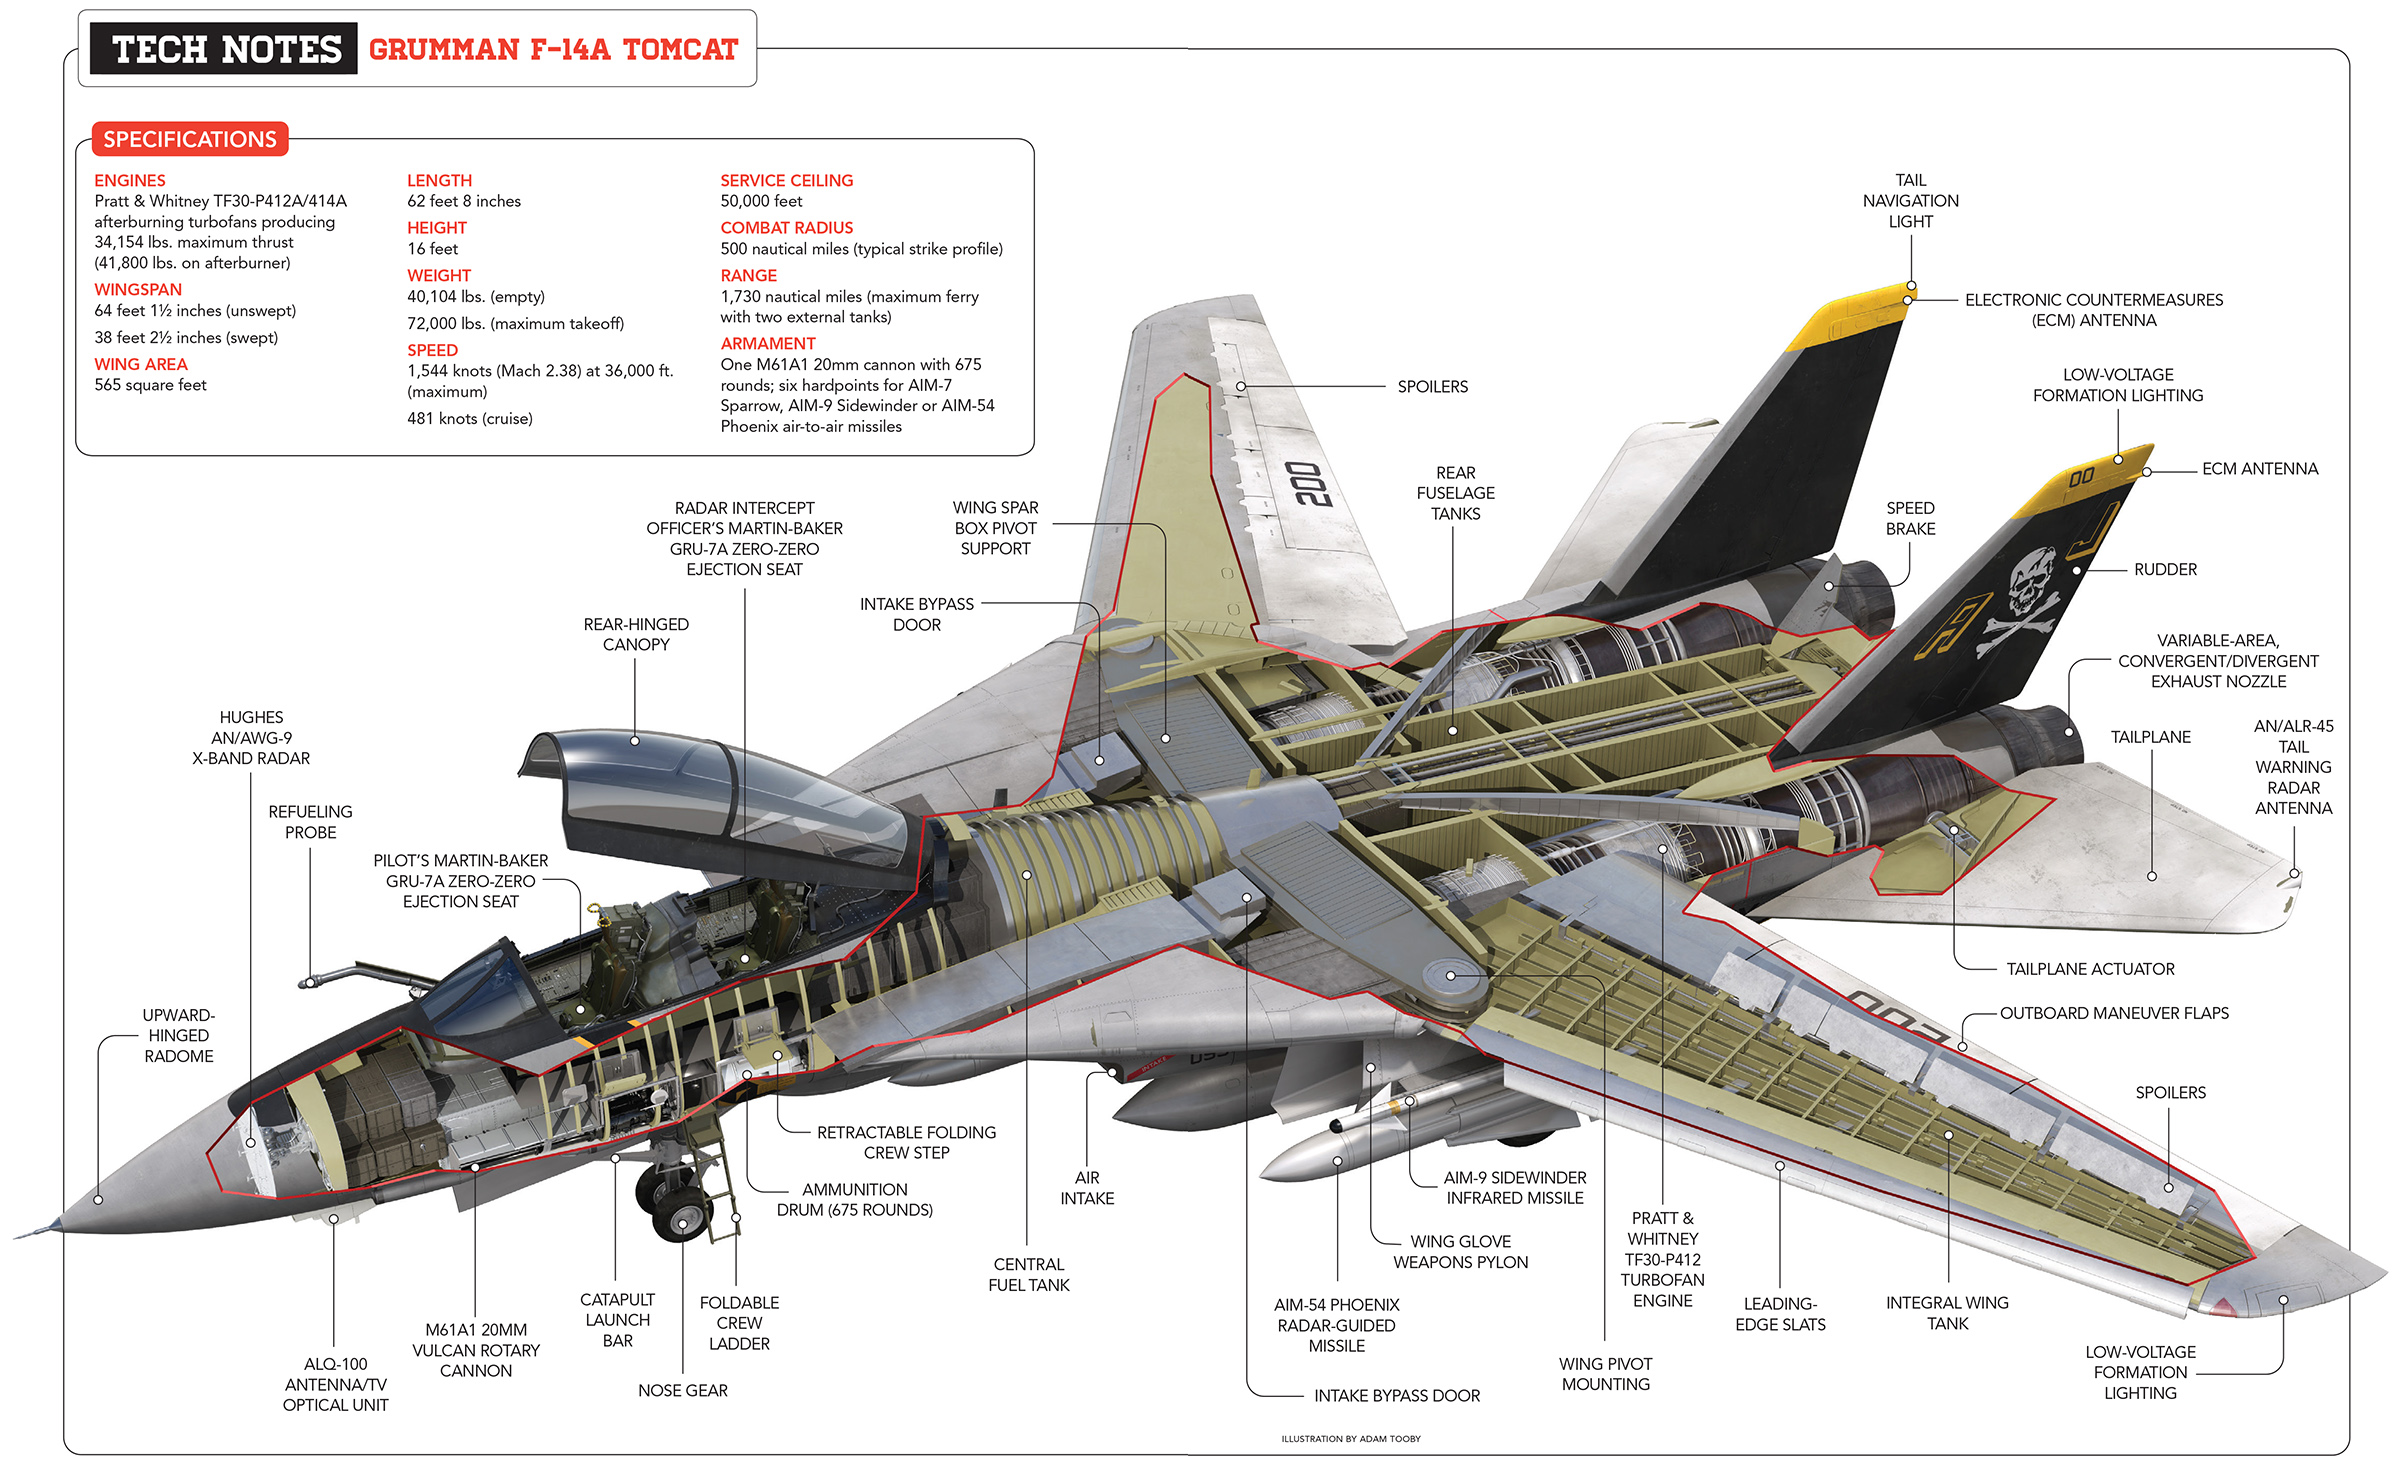 voldsom Gods Afgift Why the Grumman F-14 Tomcat Never Lived Up to Its Reputation